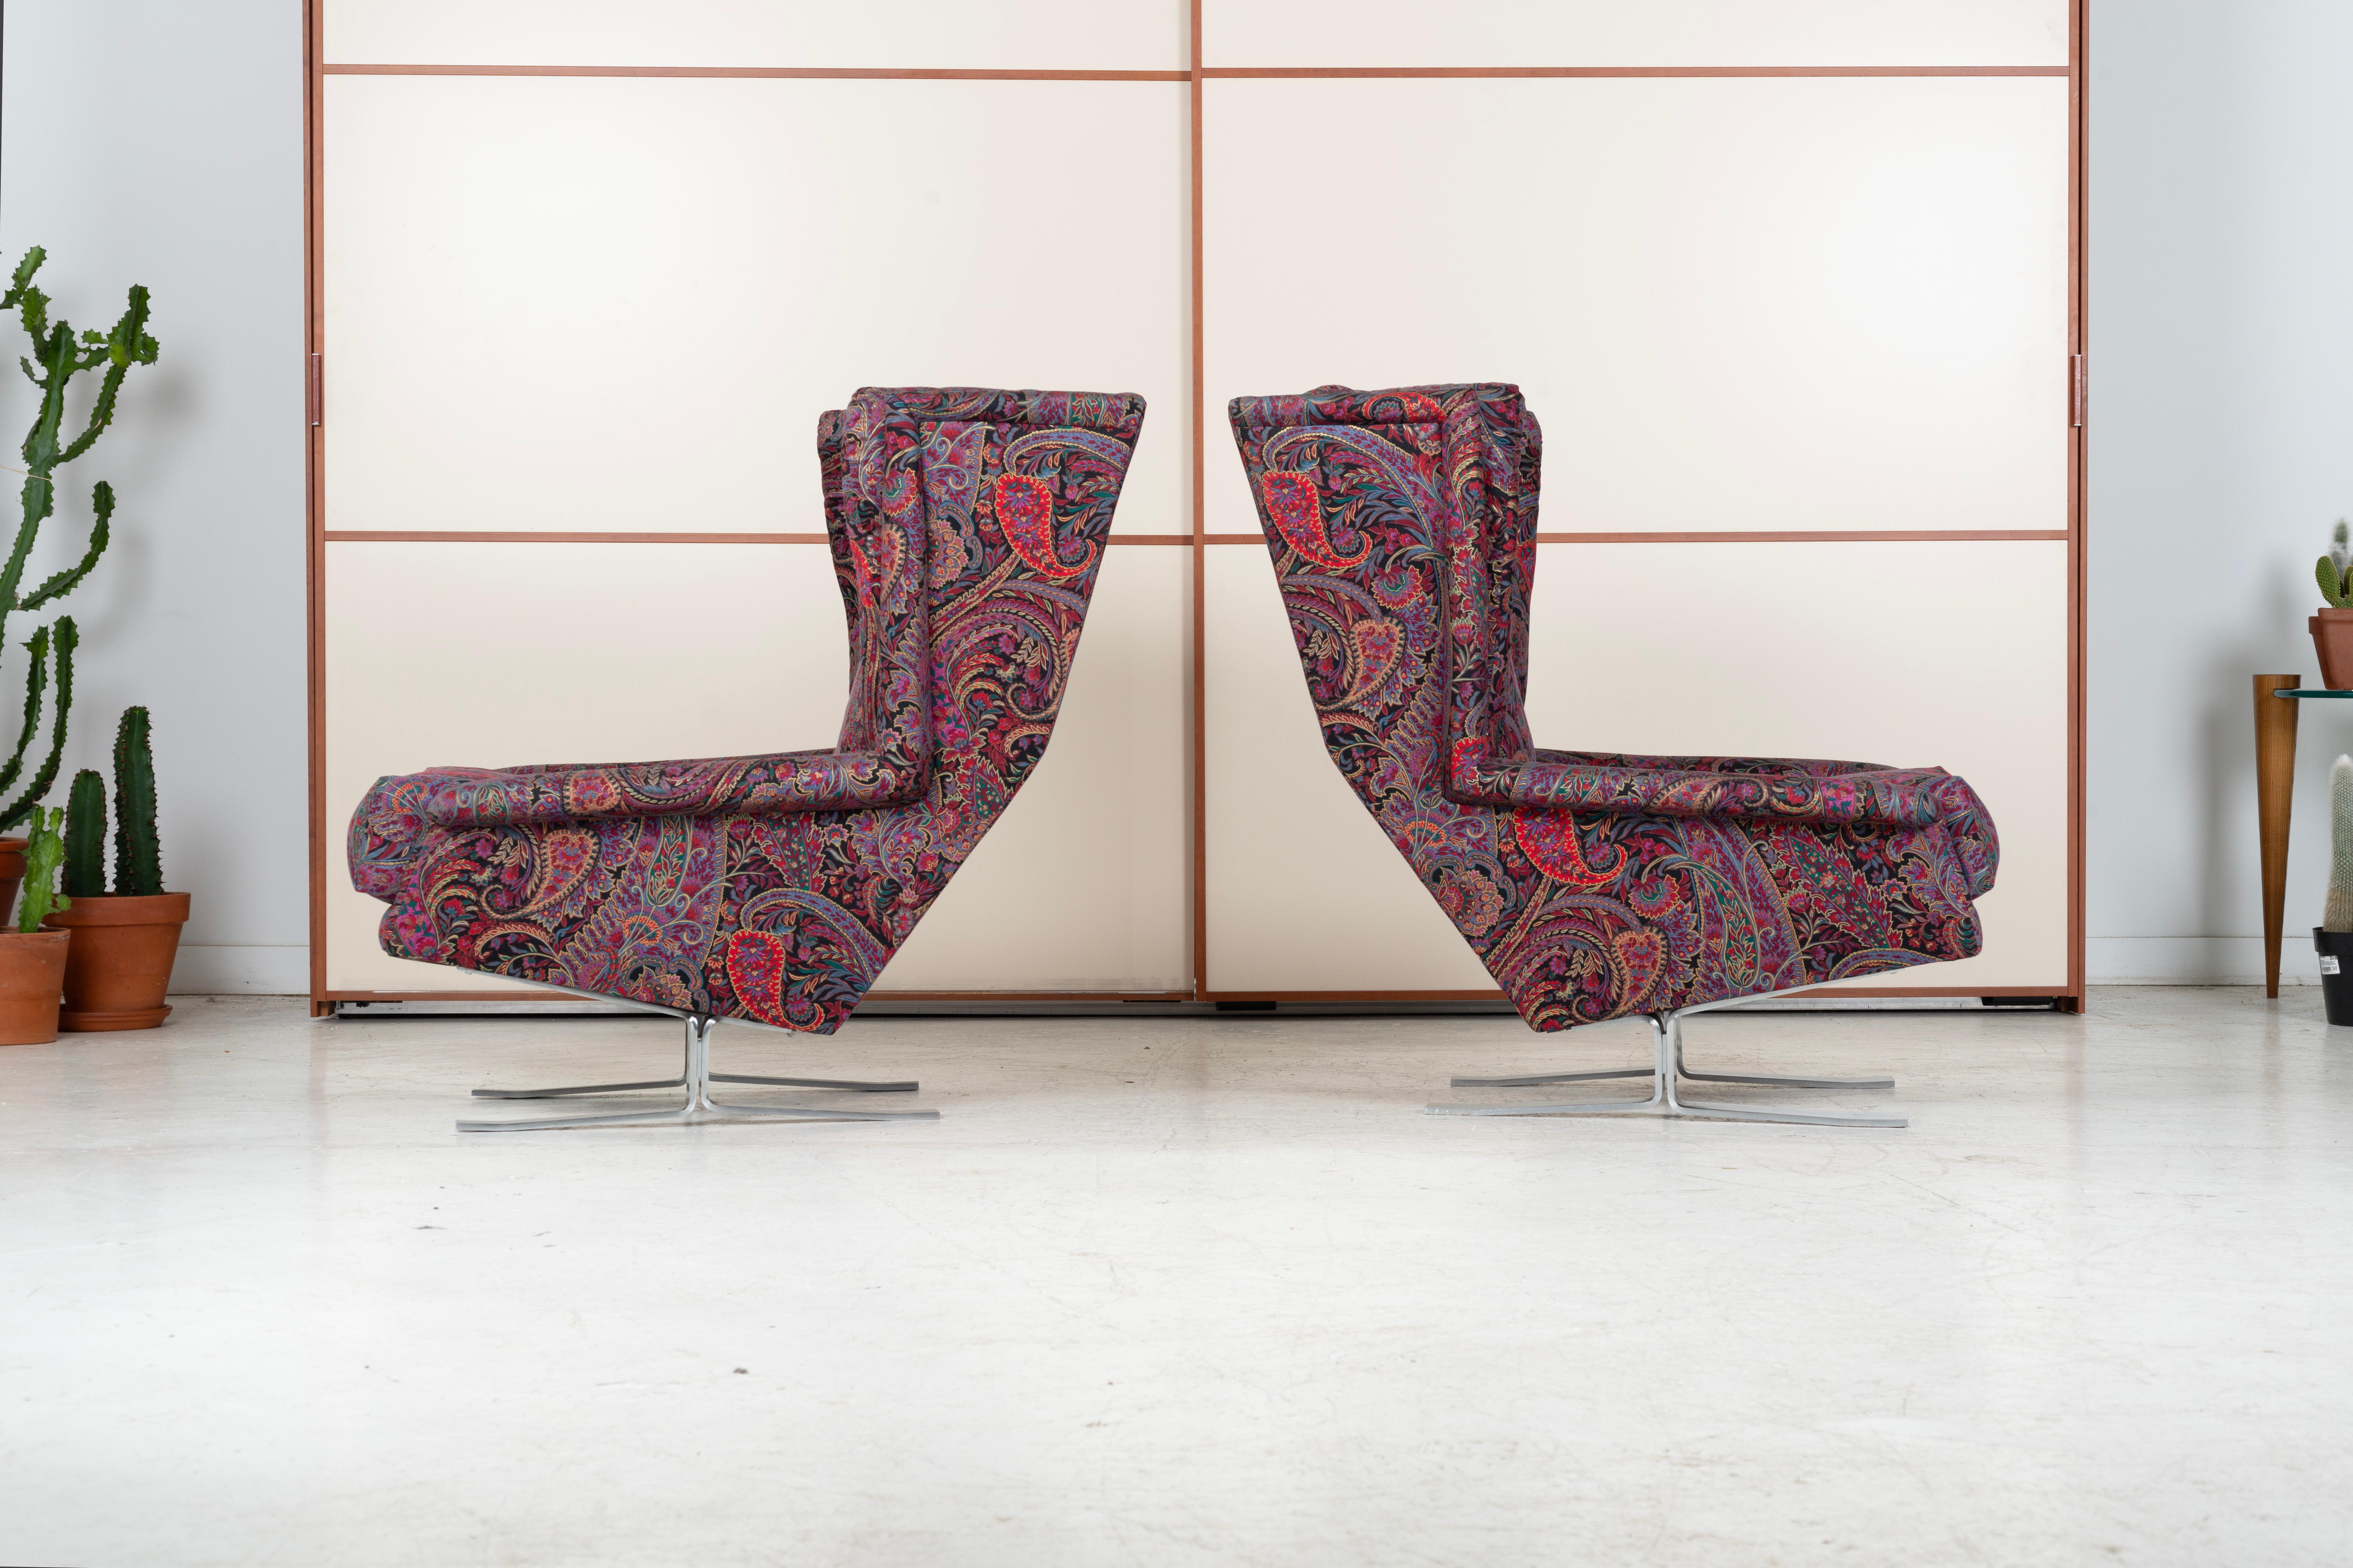 Paar Adrian Pearsall Wingback Lounge Chairs (Mitte des 20. Jahrhunderts) im Angebot